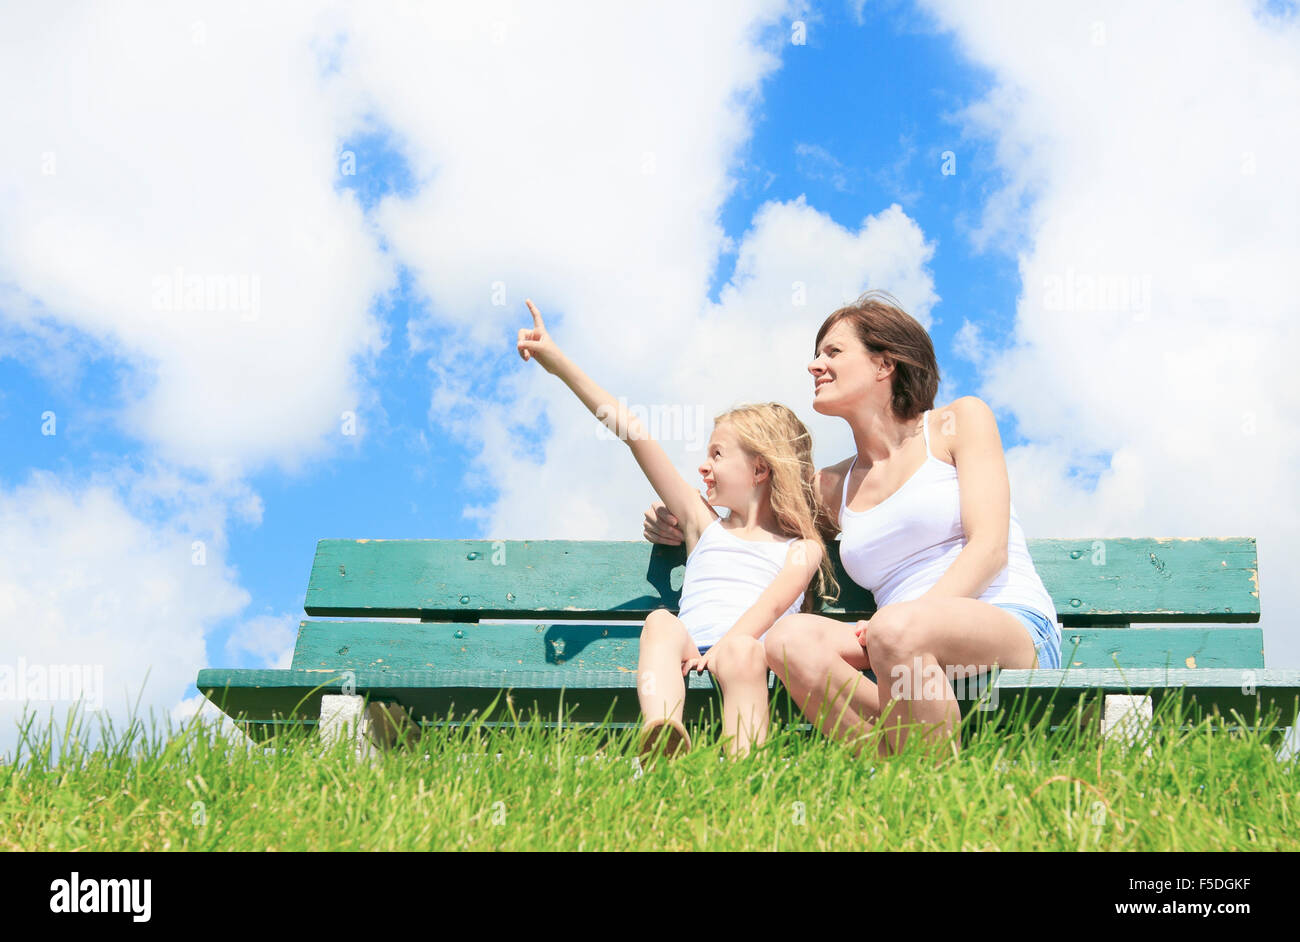 A woman with his child sitting on the bench Stock Photo